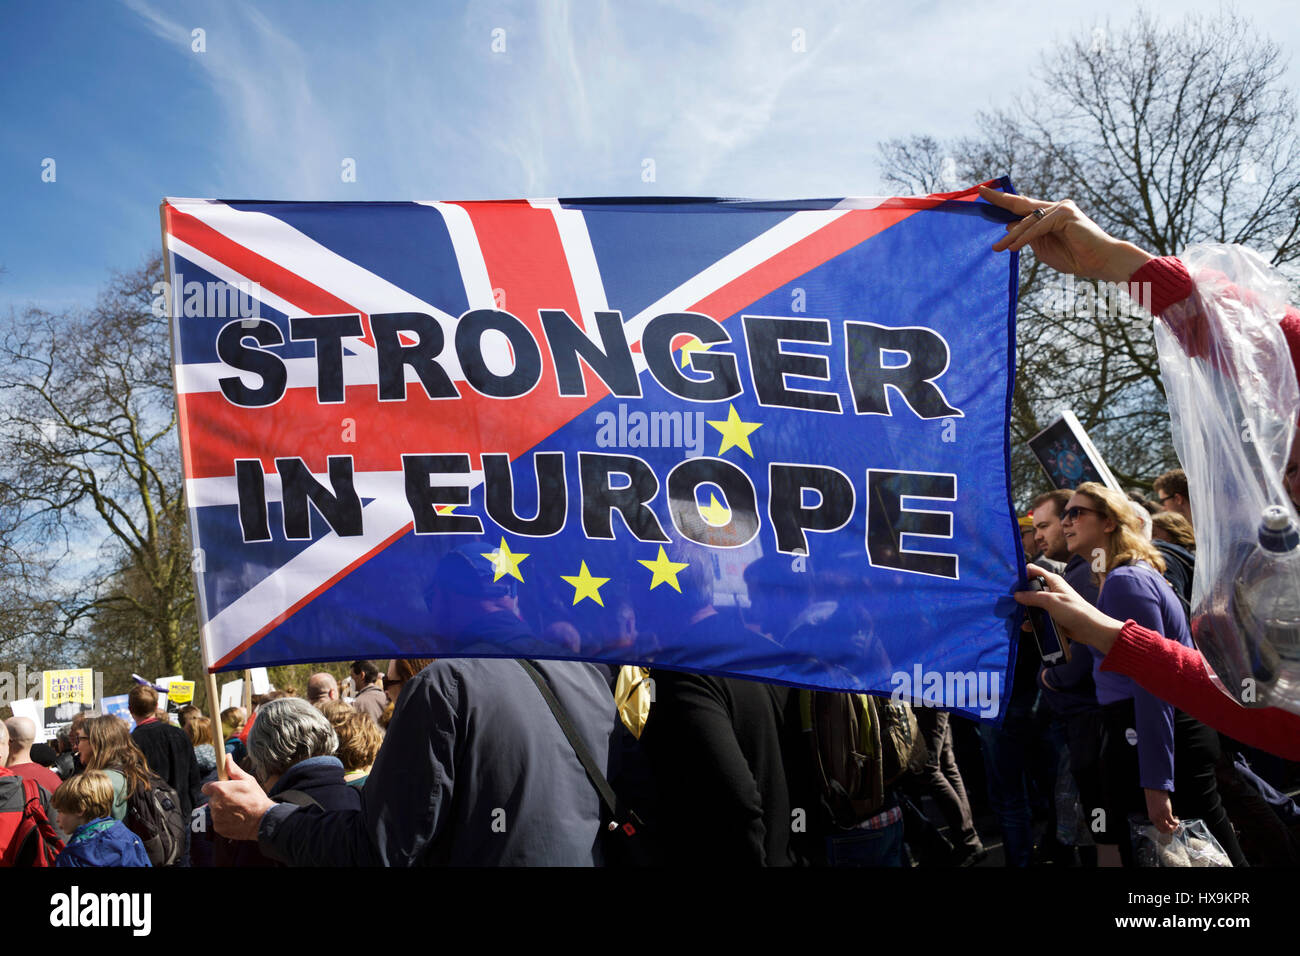 London, UK. 25th March 2017. Unite for Europe organised a Pro-EU march in London. Anti-BREXIT demonstrators march from Park Lane to Parliament Square. Politics UK. Stock Photo